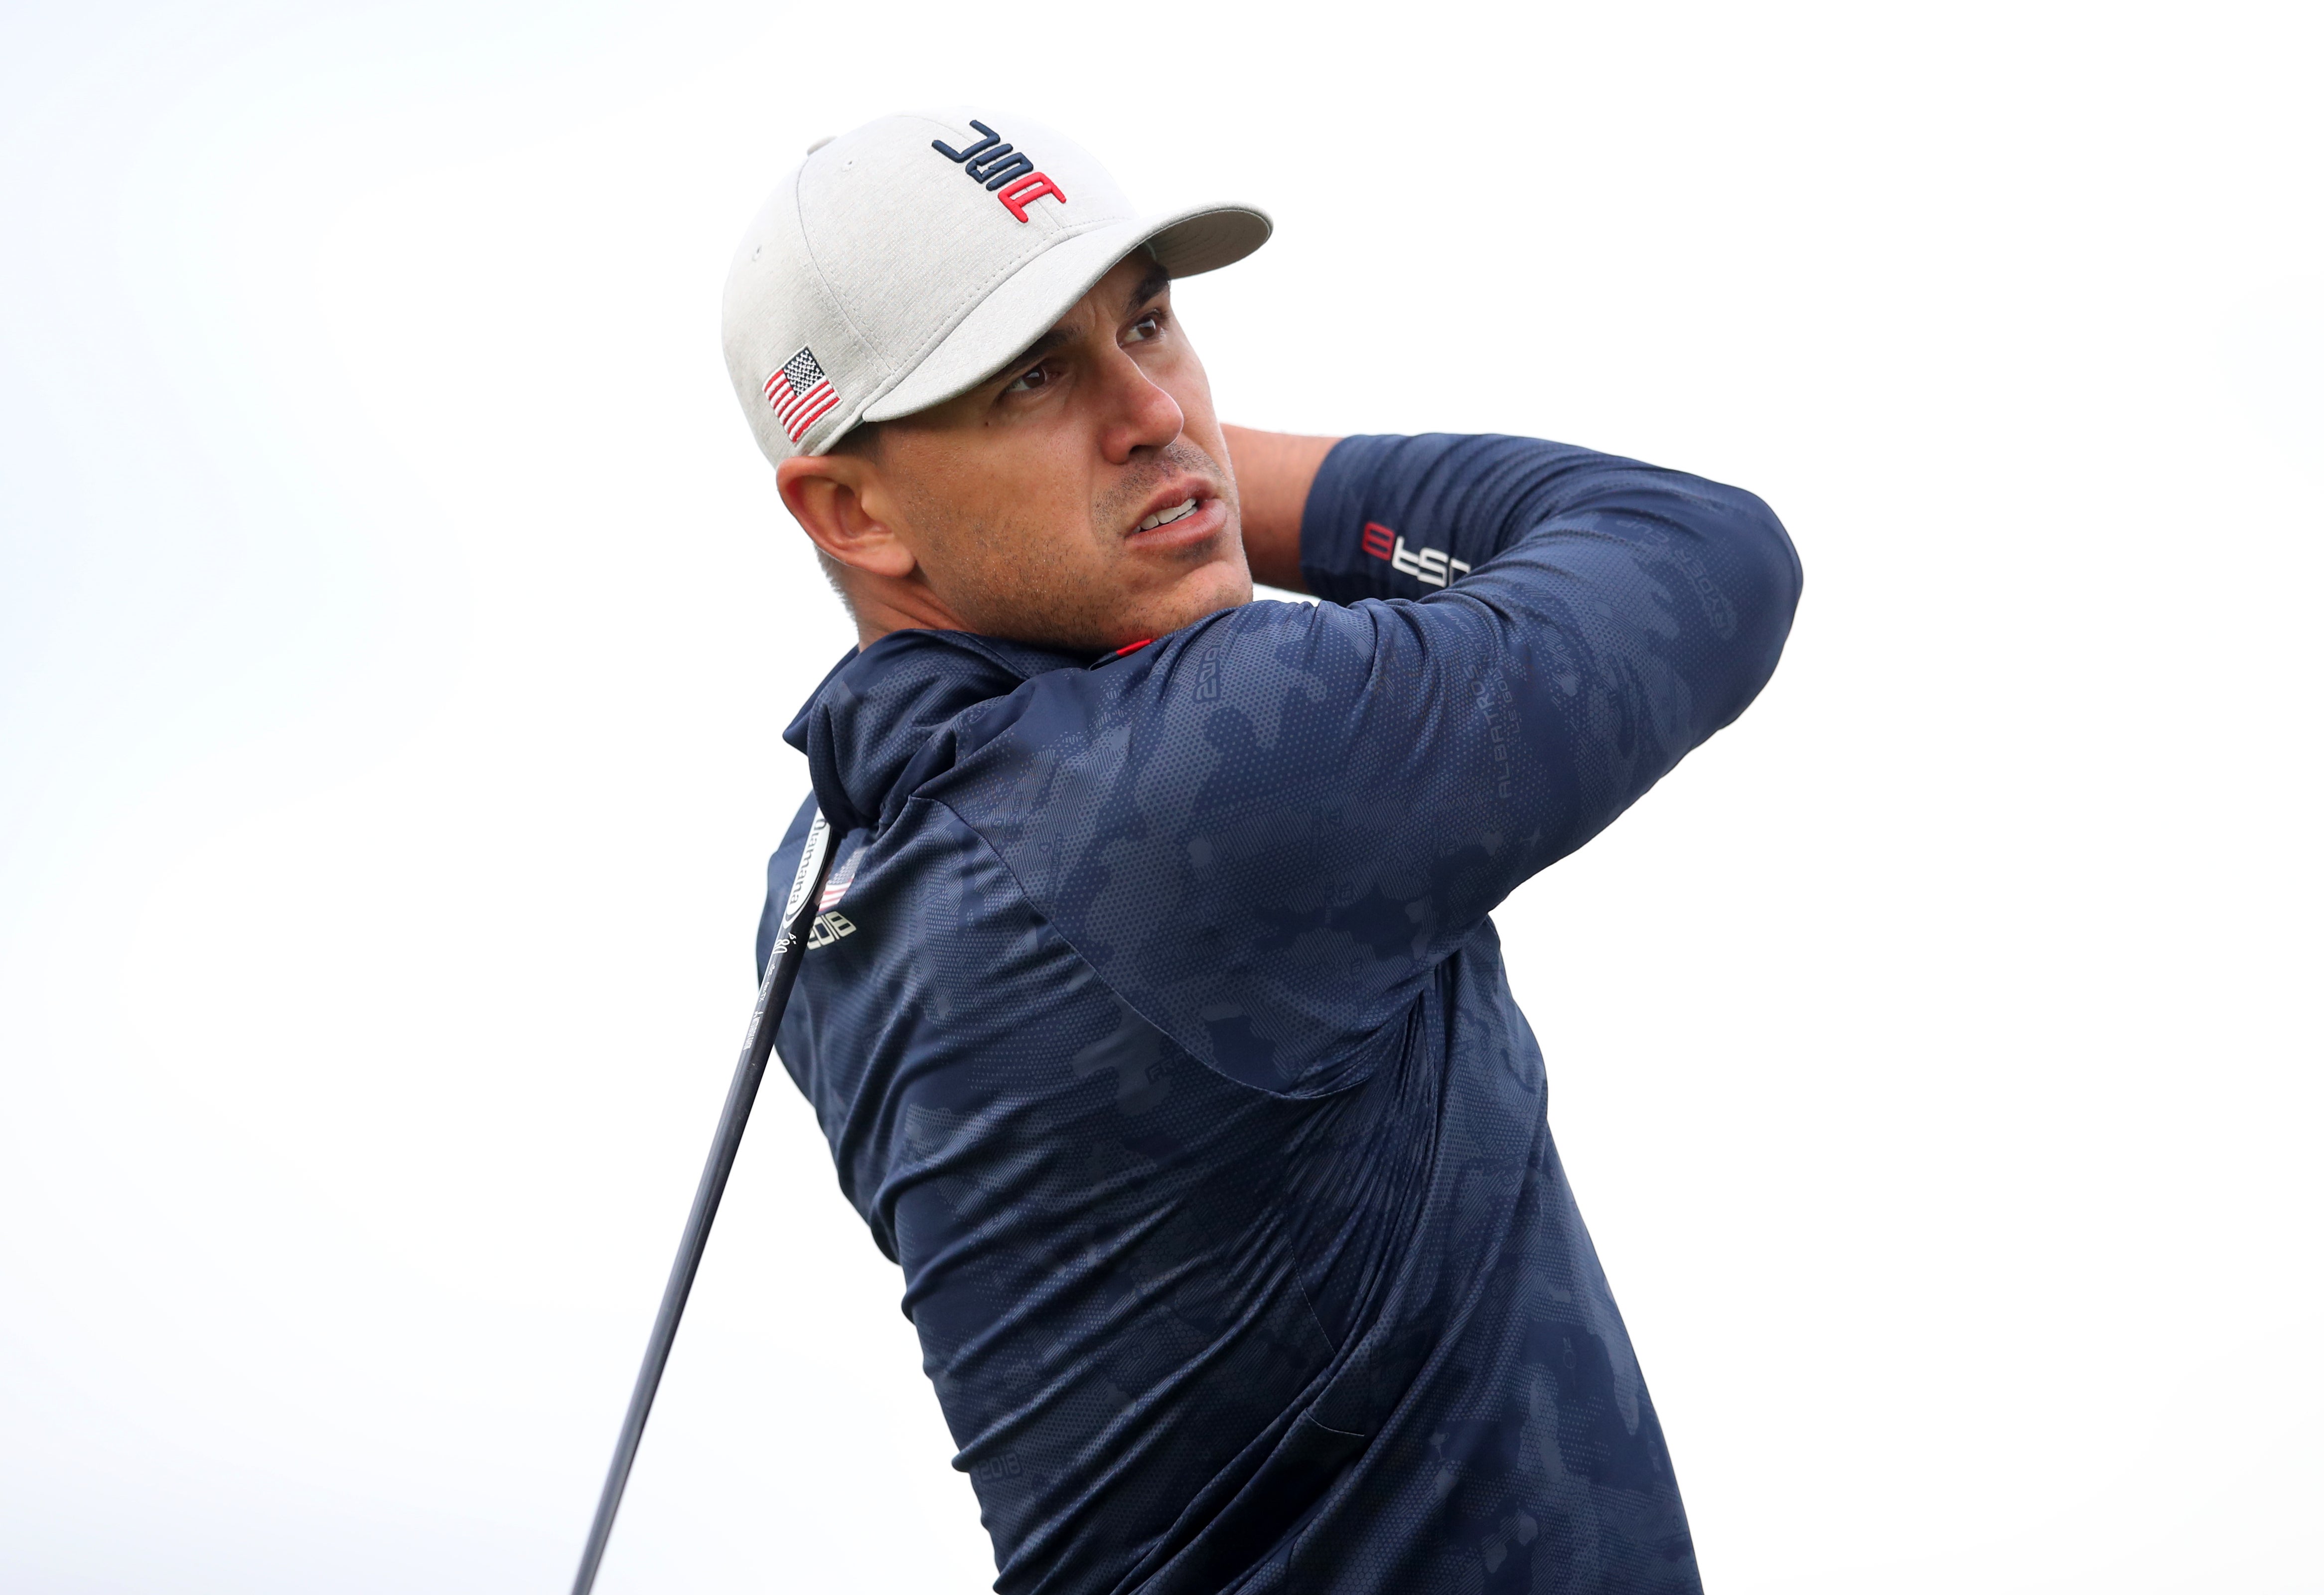 Brooks Koepka was in no mood to answer questions about his relationship with rival Bryson DeChambeau as he took aim at the assembled media